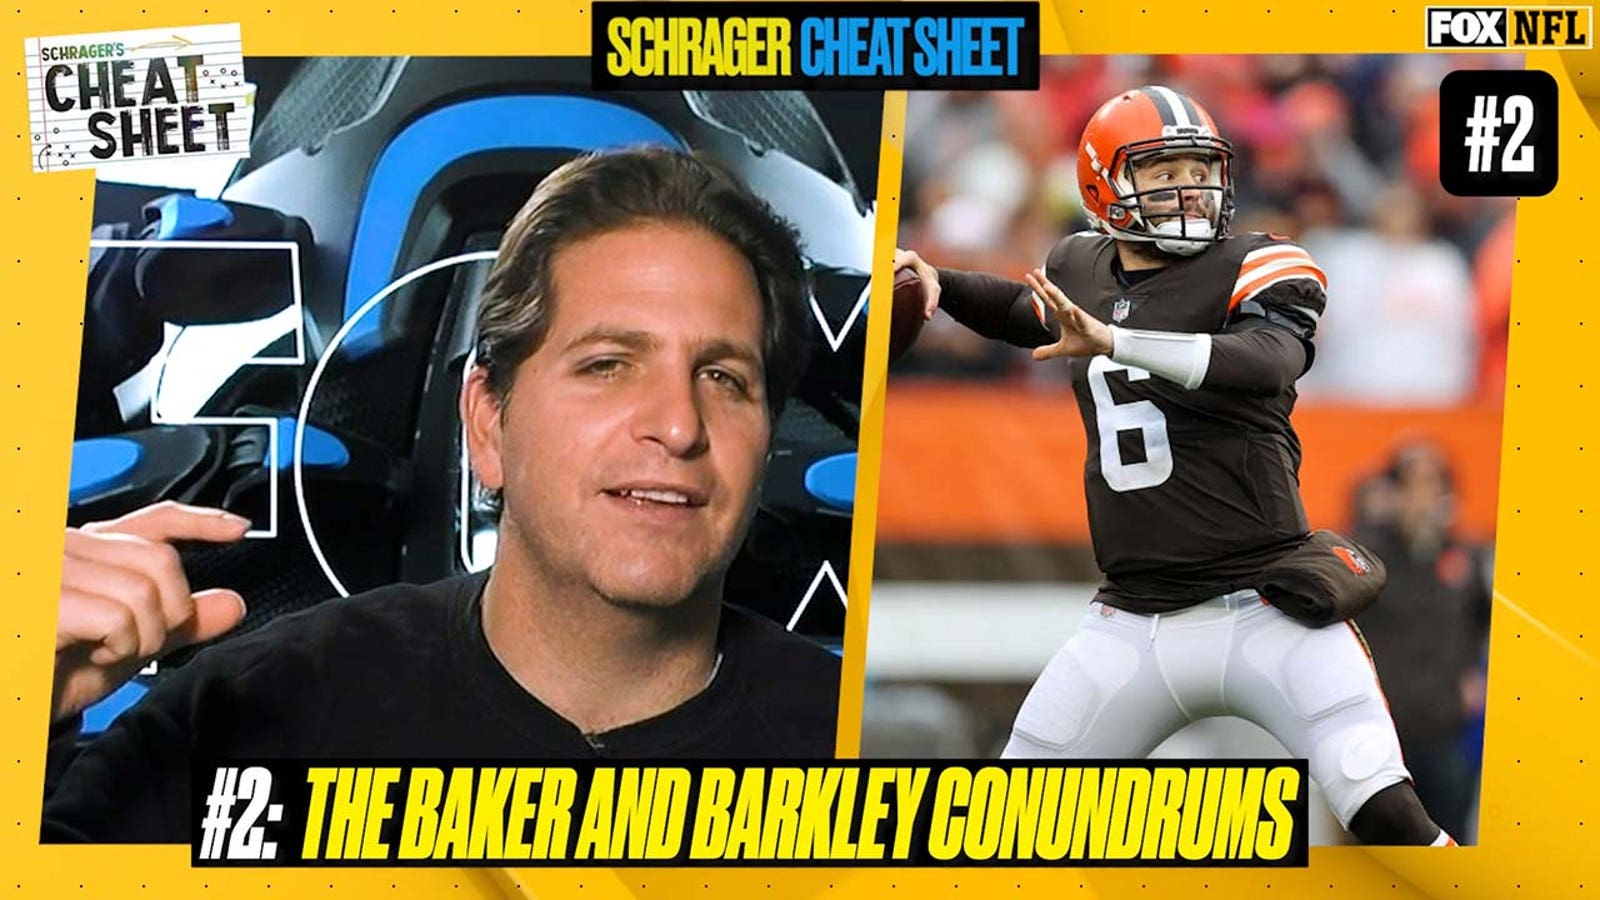 Peter Schrager on whether the Browns will give Baker Mayfield an extension, Barkley's expectations in New York I Cheat Sheet for Week 12